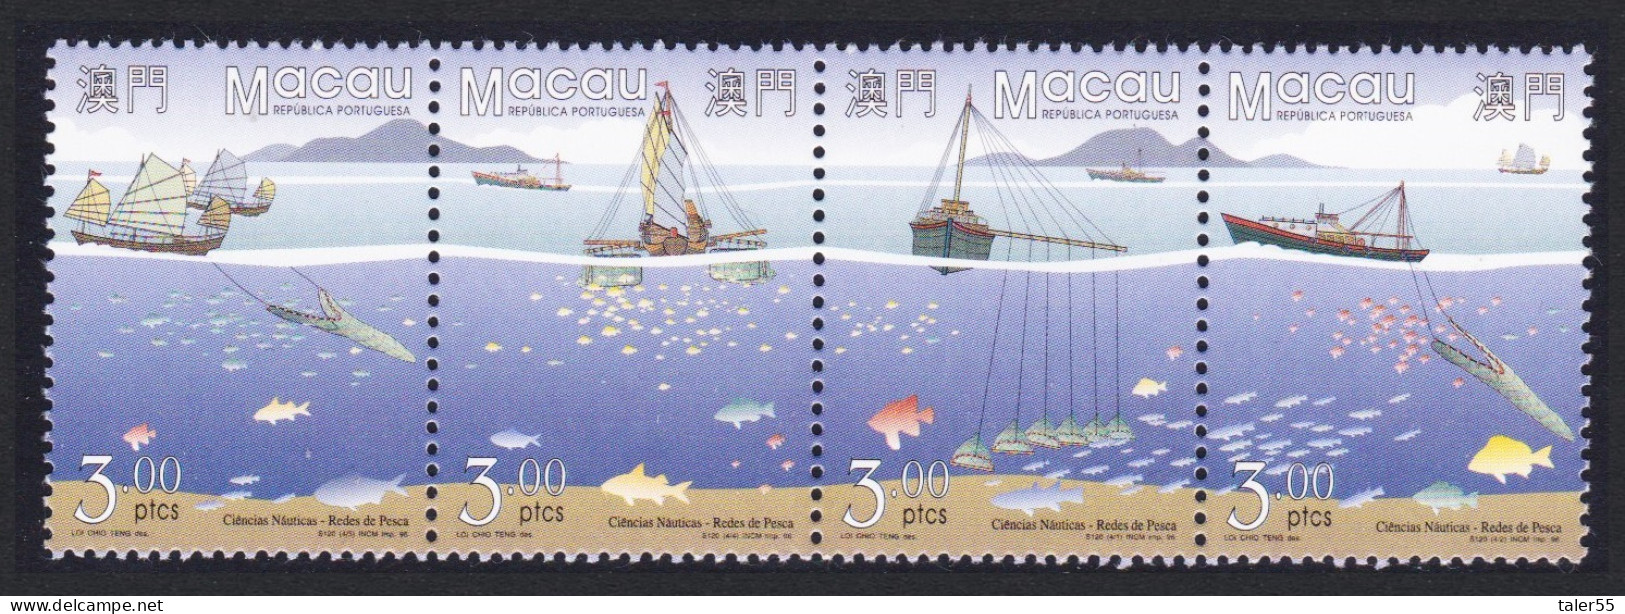 Macao Macau Fish Boats Fishing Nets Strip Of 4 1996 MNH SG#952-955 Sc#841a - Unused Stamps